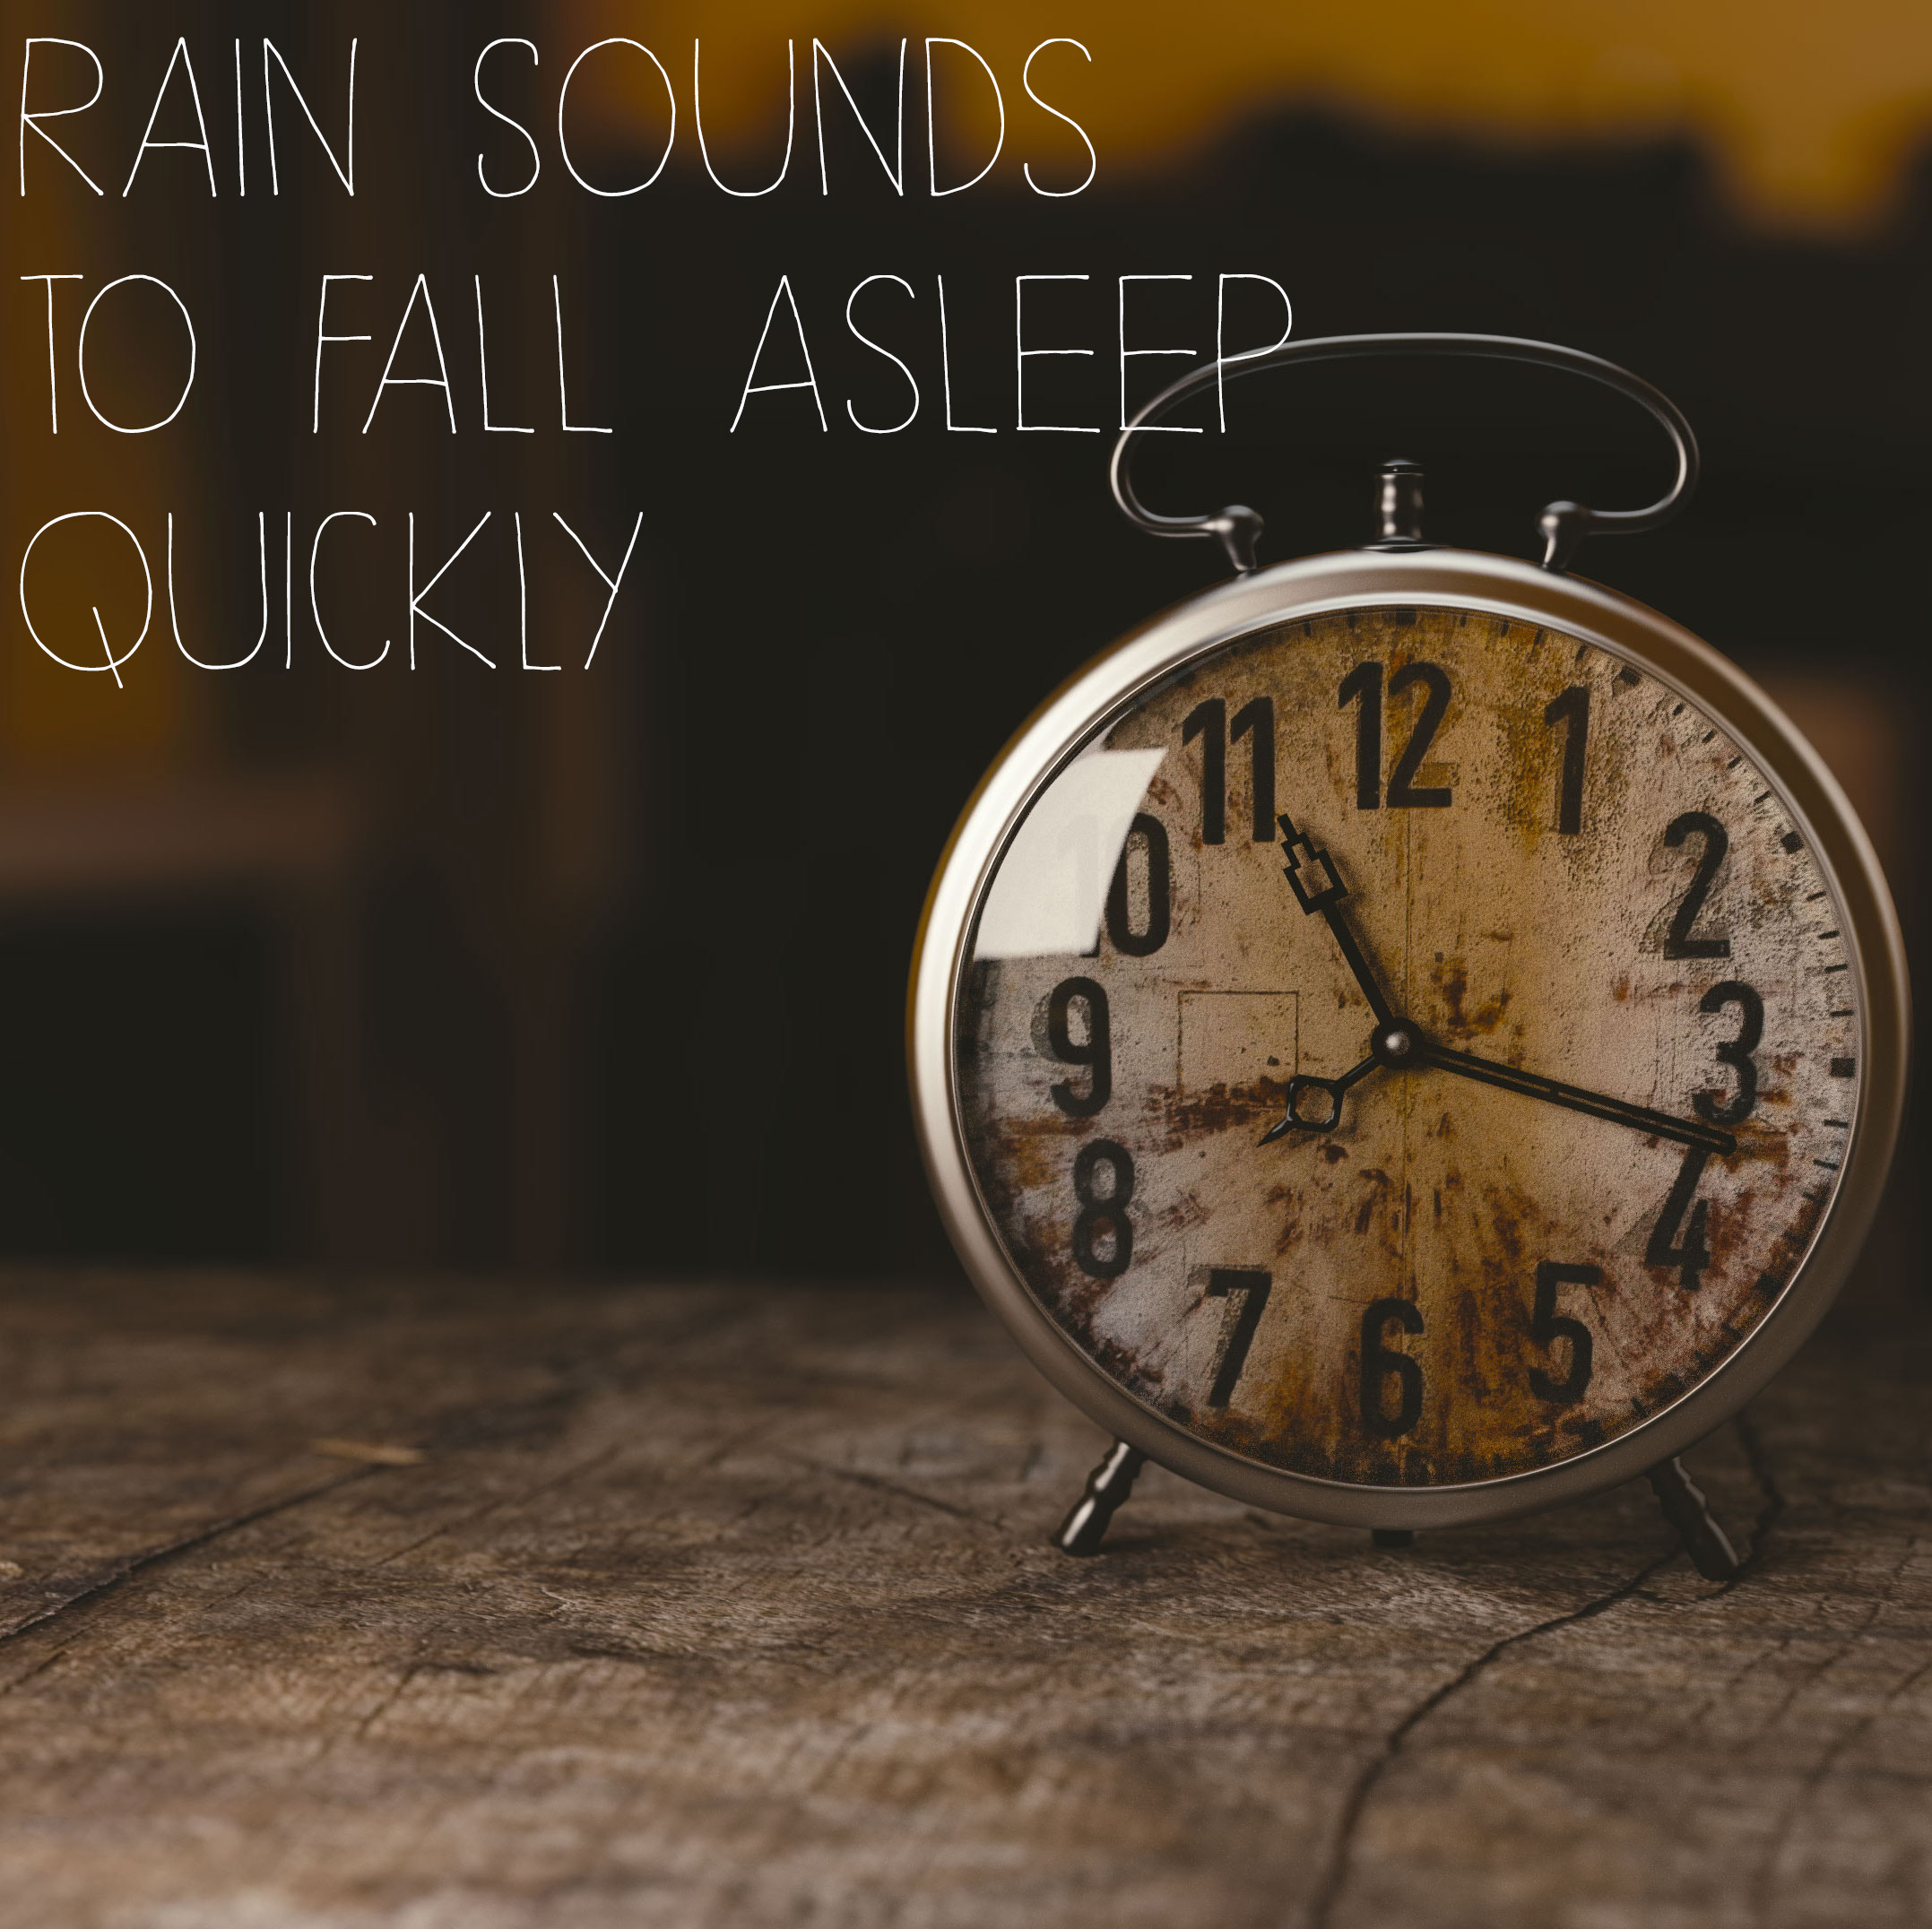 18 Tracks to Help you Fall to Sleep Quickly